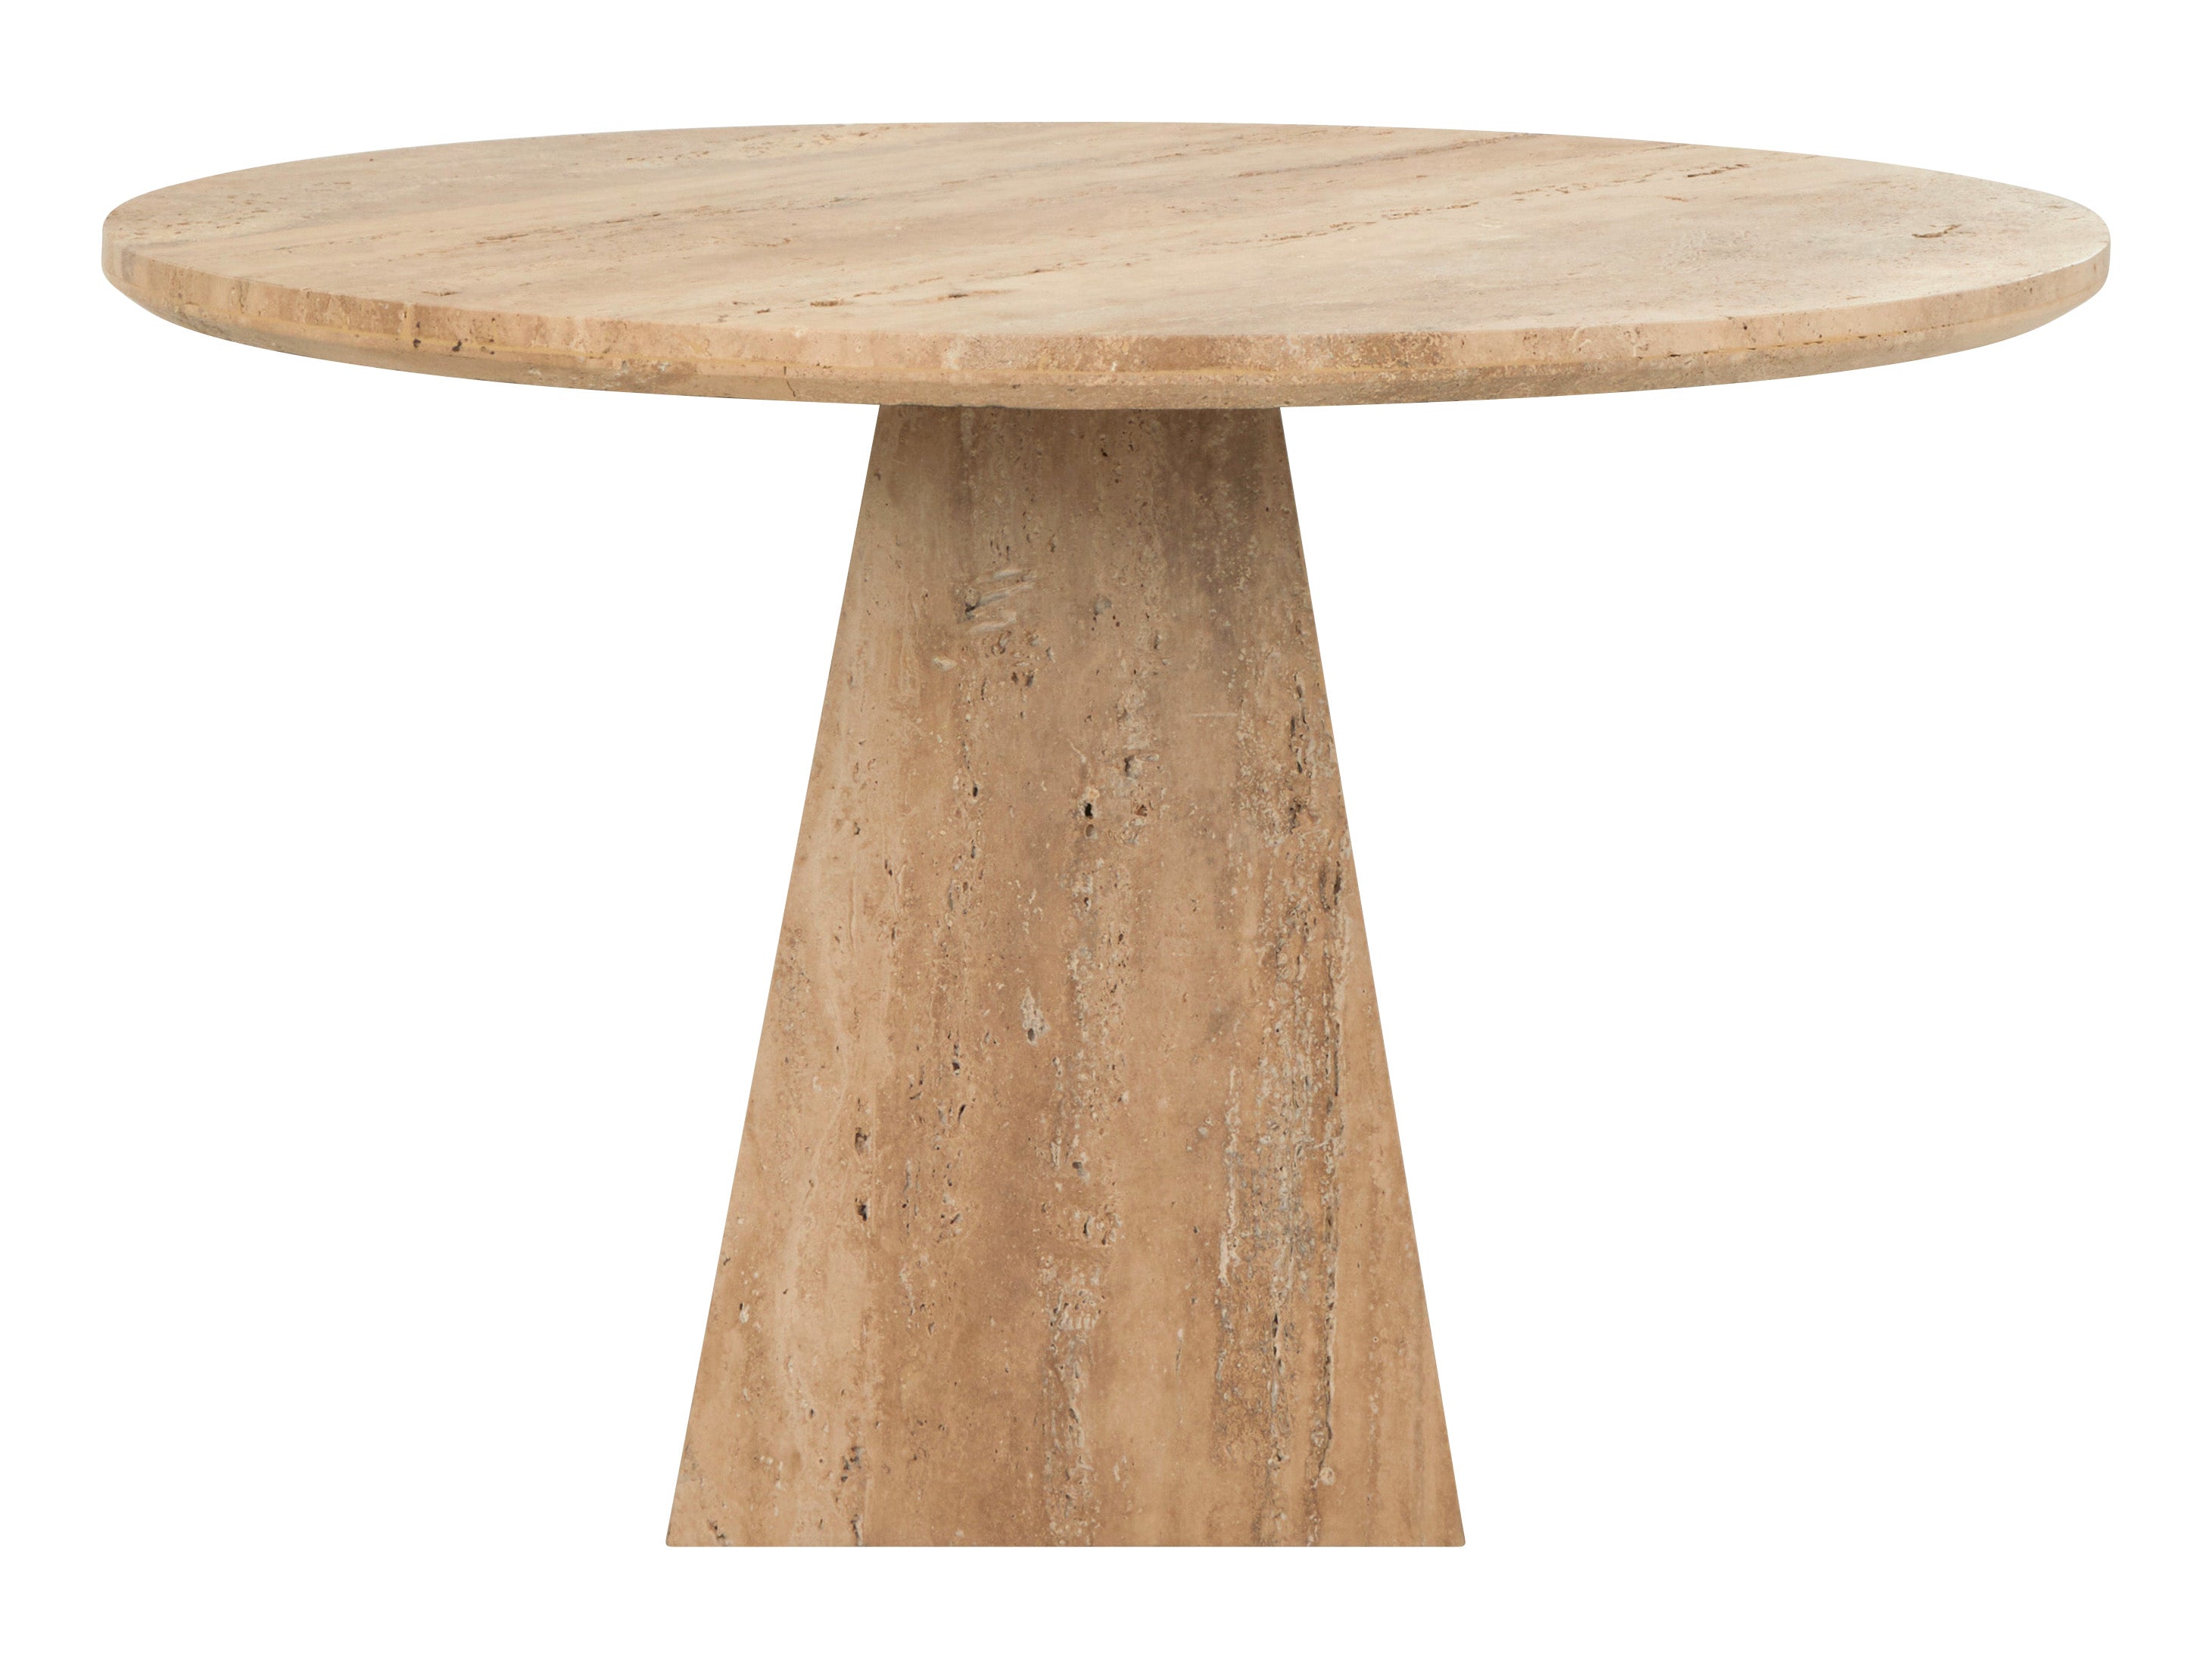 Talley Dining Table